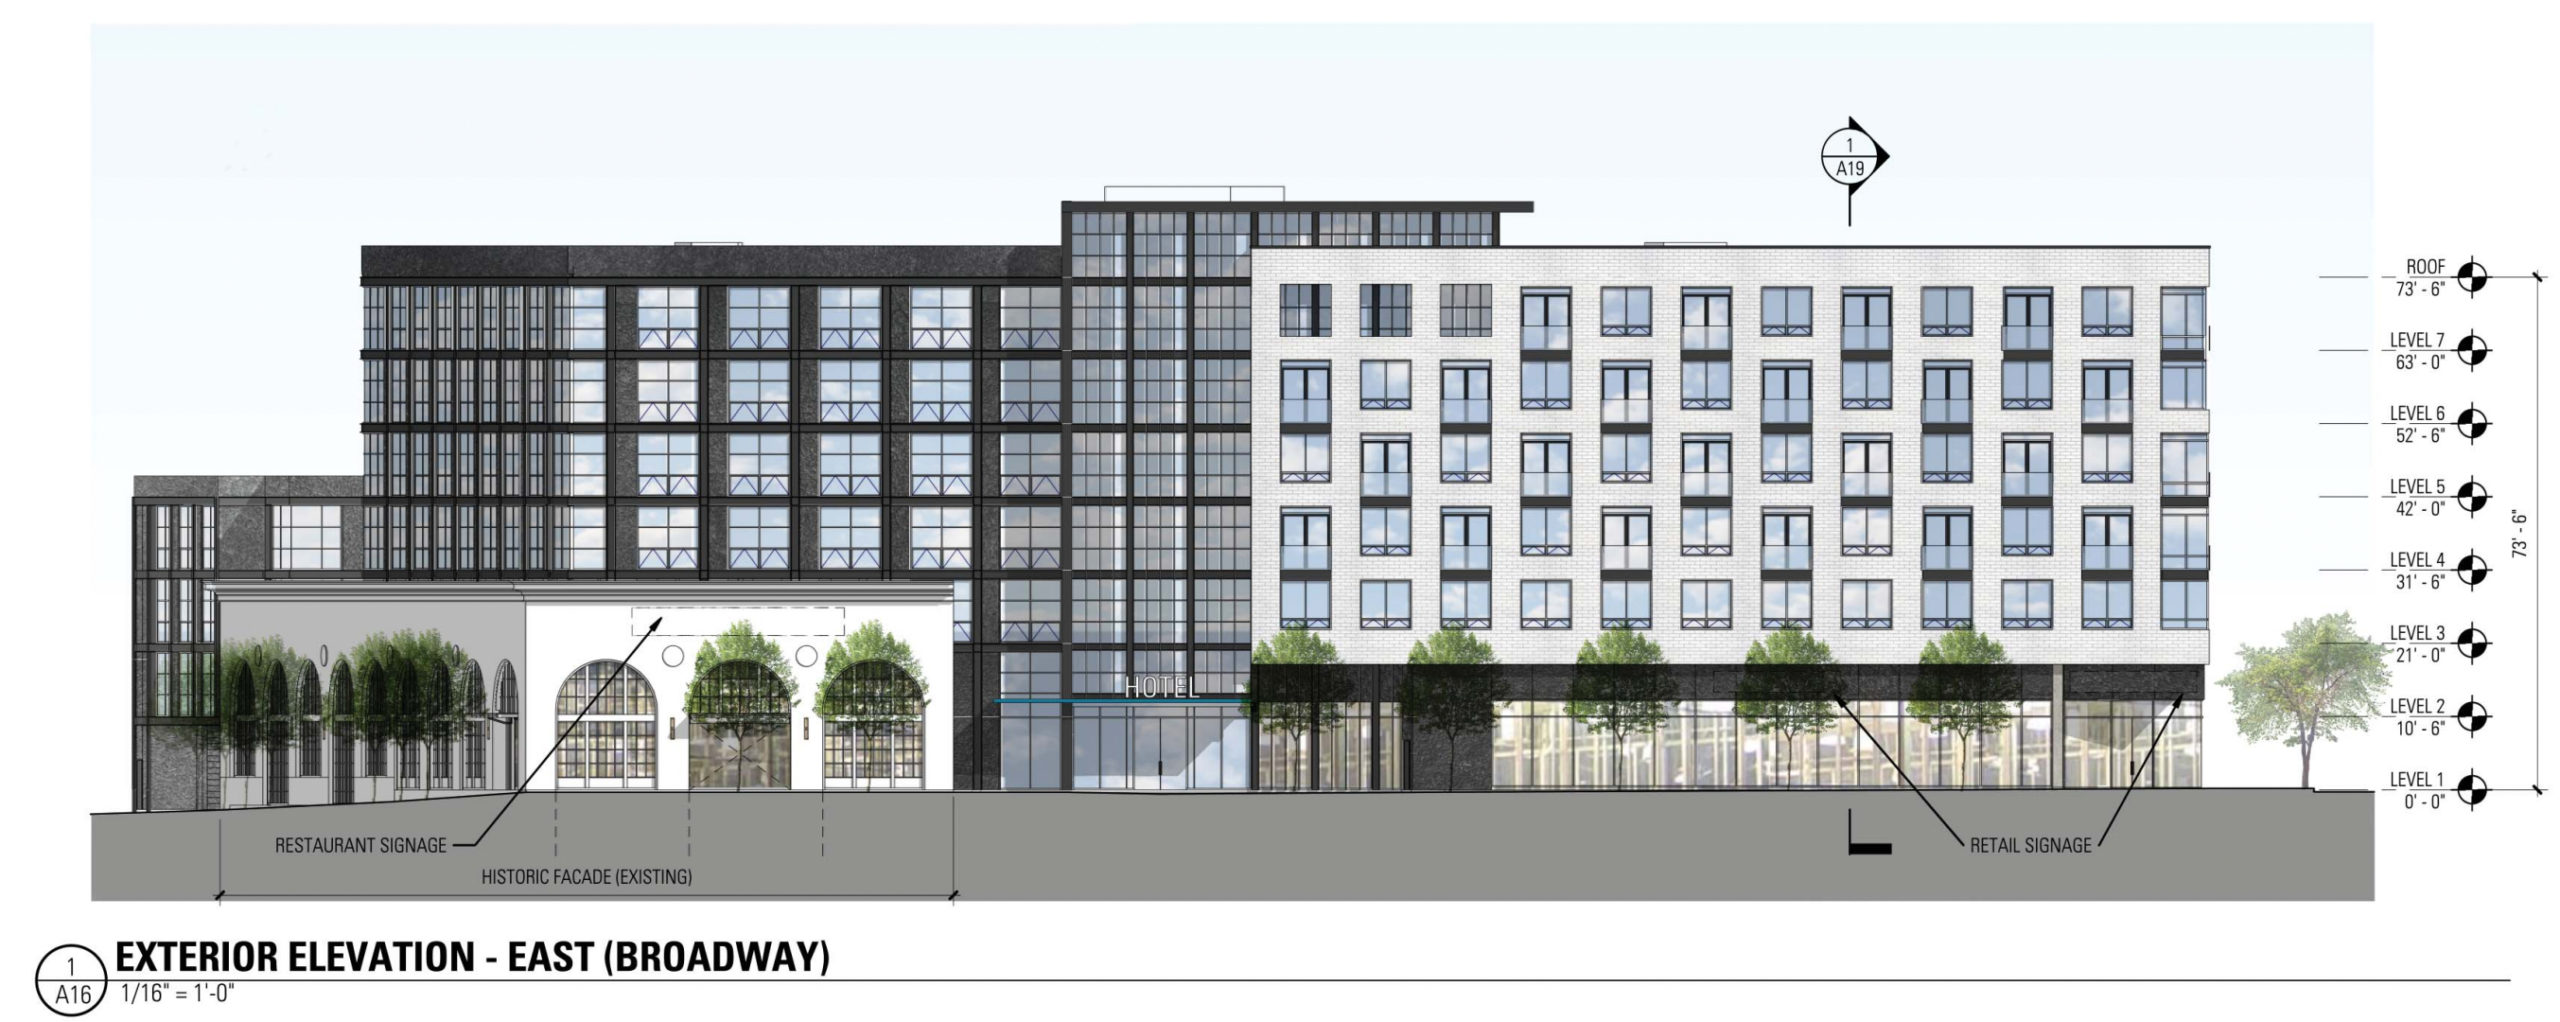 2455 Broadway east exterior elevation, rendering by BAR Architects